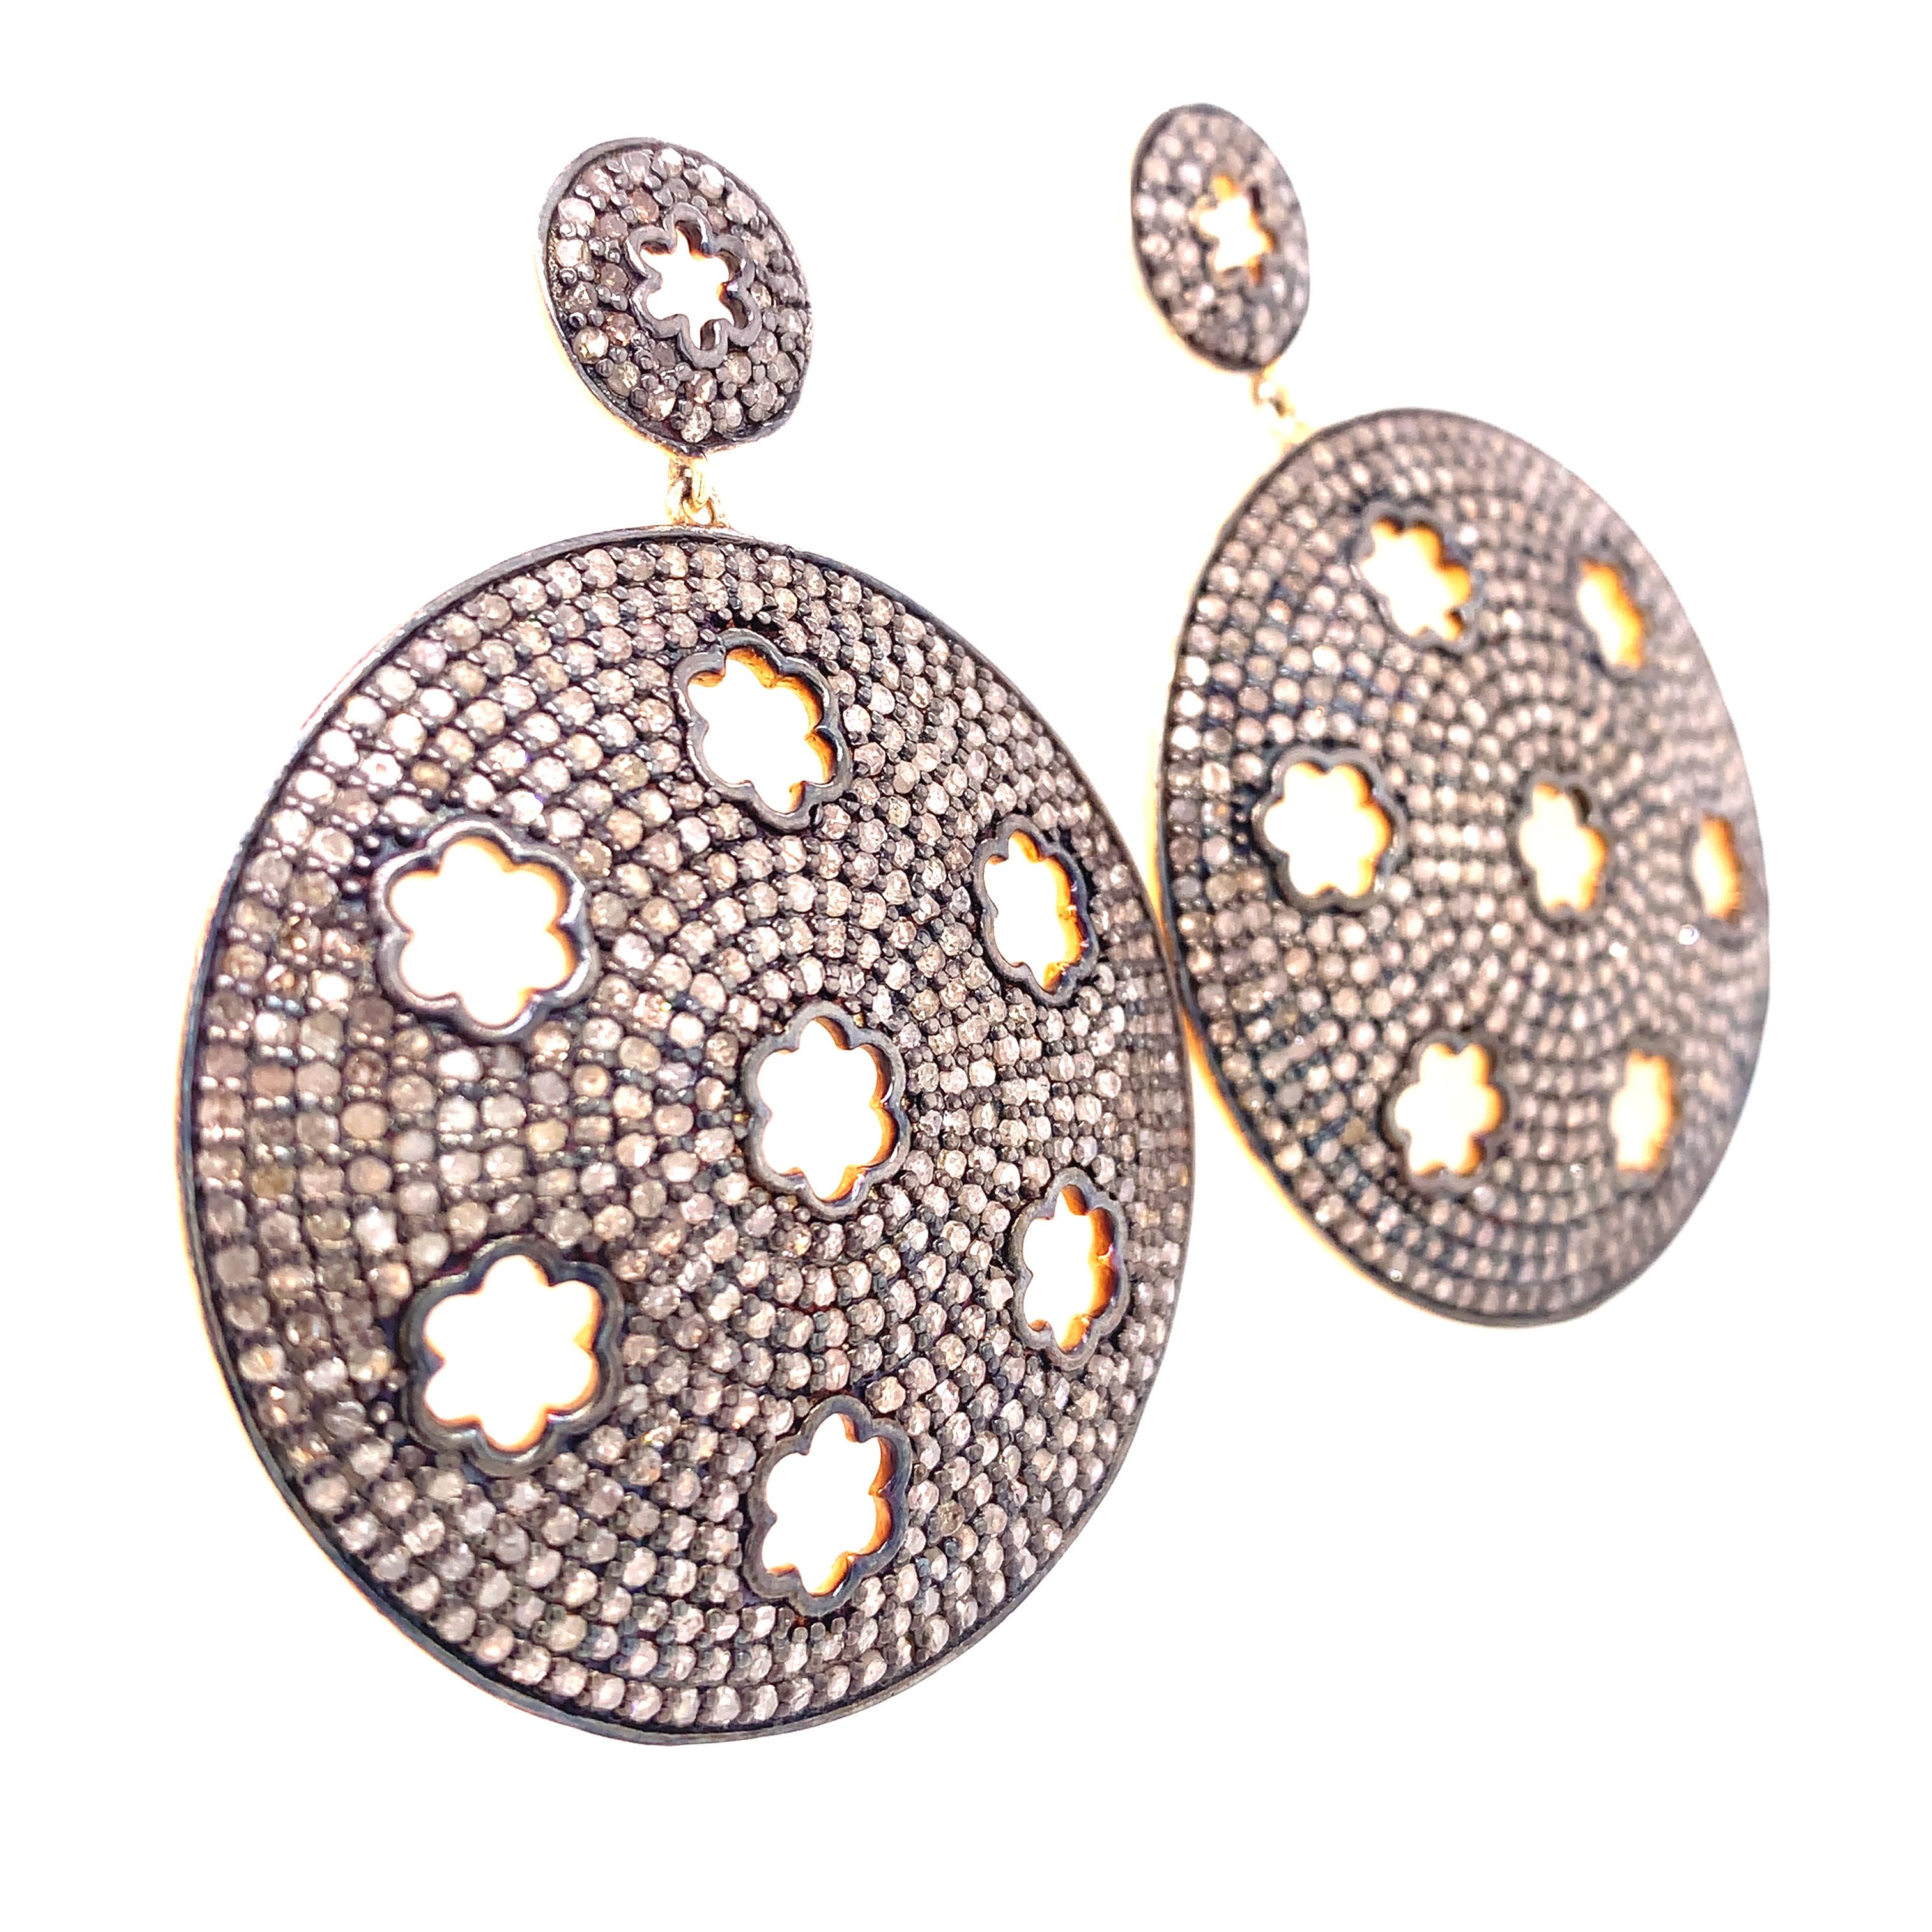 Rustic Collection

Disc pattern earrings with Rustic Diamonds set in sterling silver and 14K yellow gold plating.

Diamond : 8.27 ct total weight.

